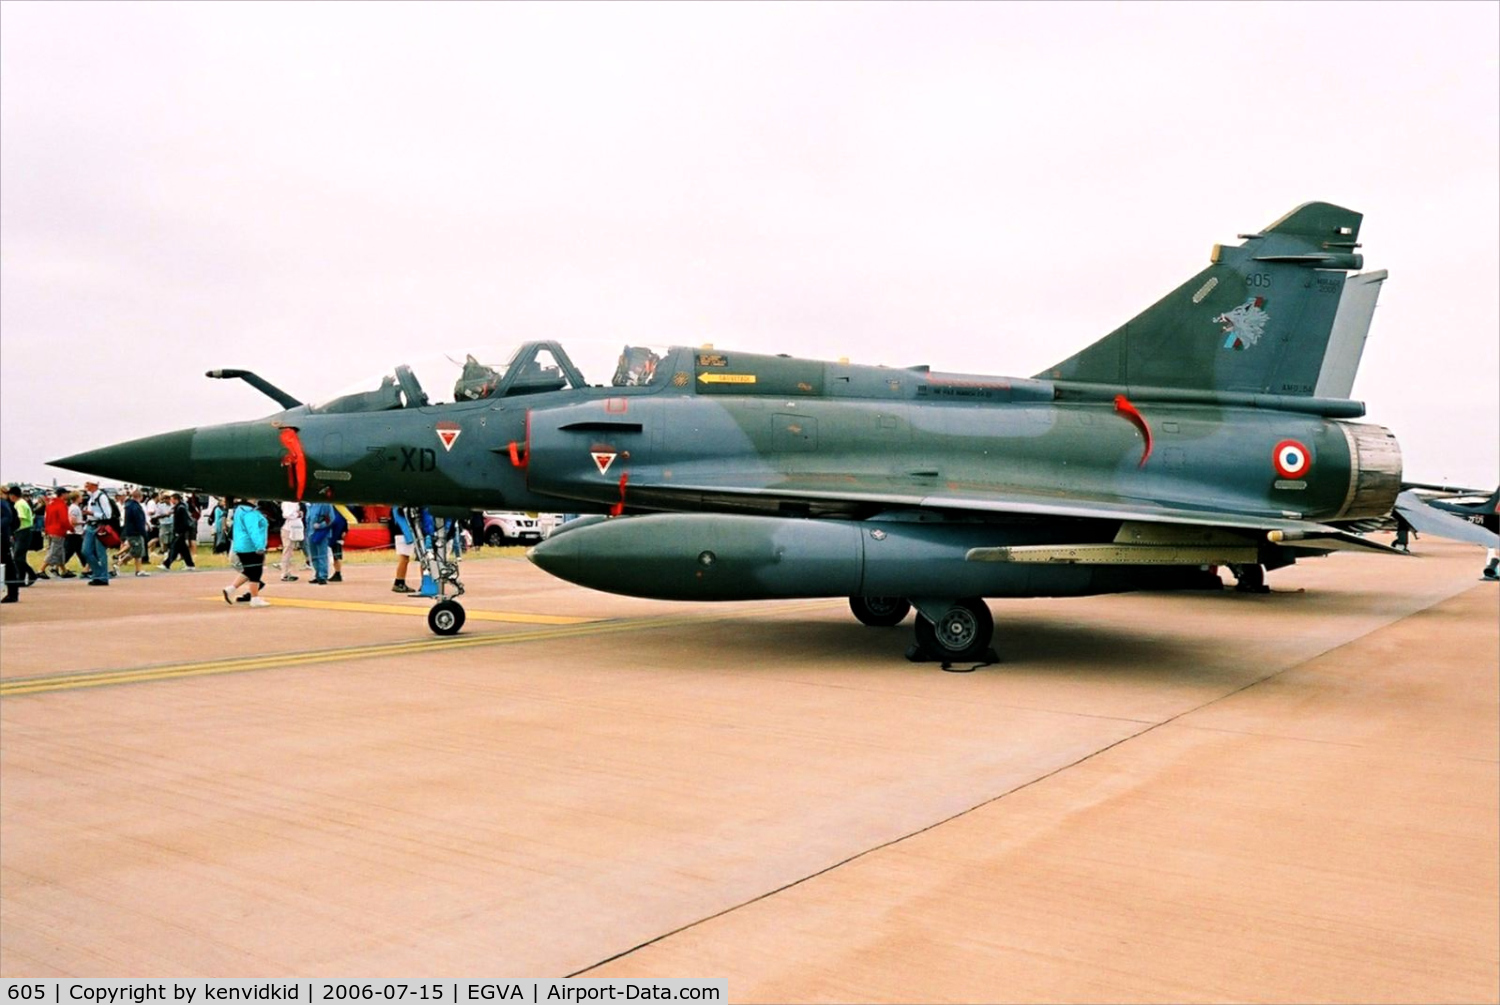 605, Dassault Mirage 2000D C/N 397, French Air Force on static display at RIAT.